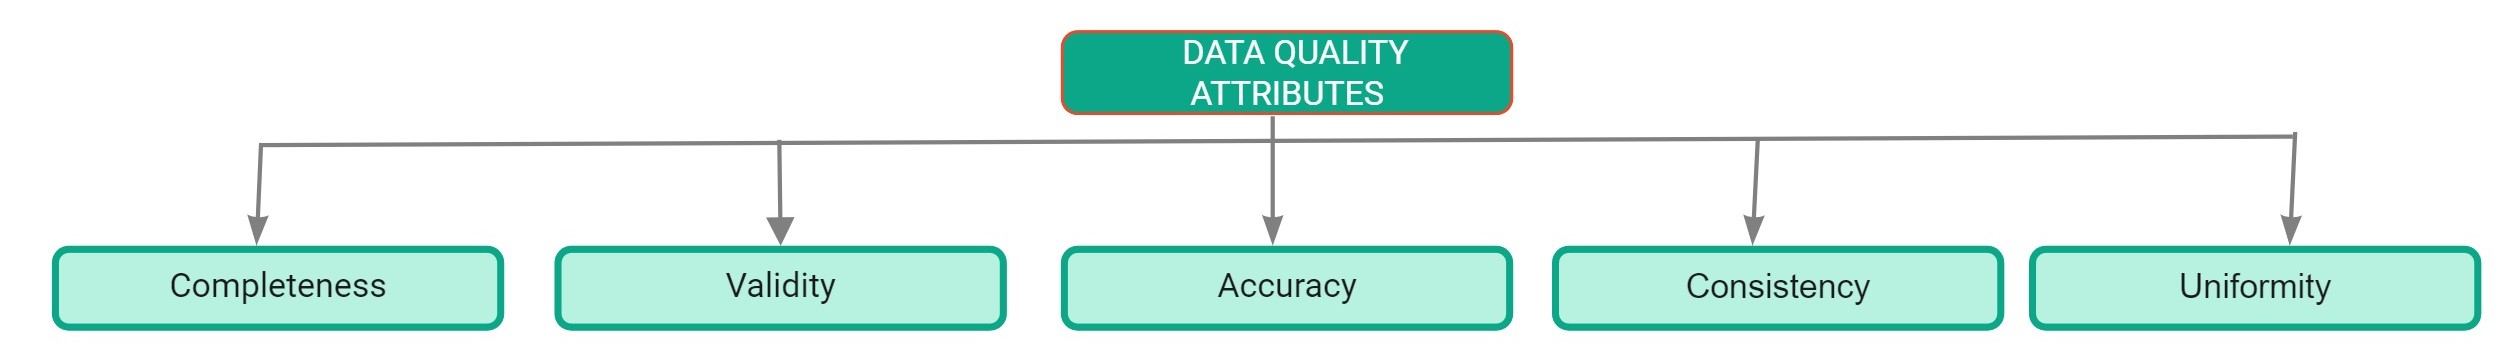 Data quality attribute | Data cleansing